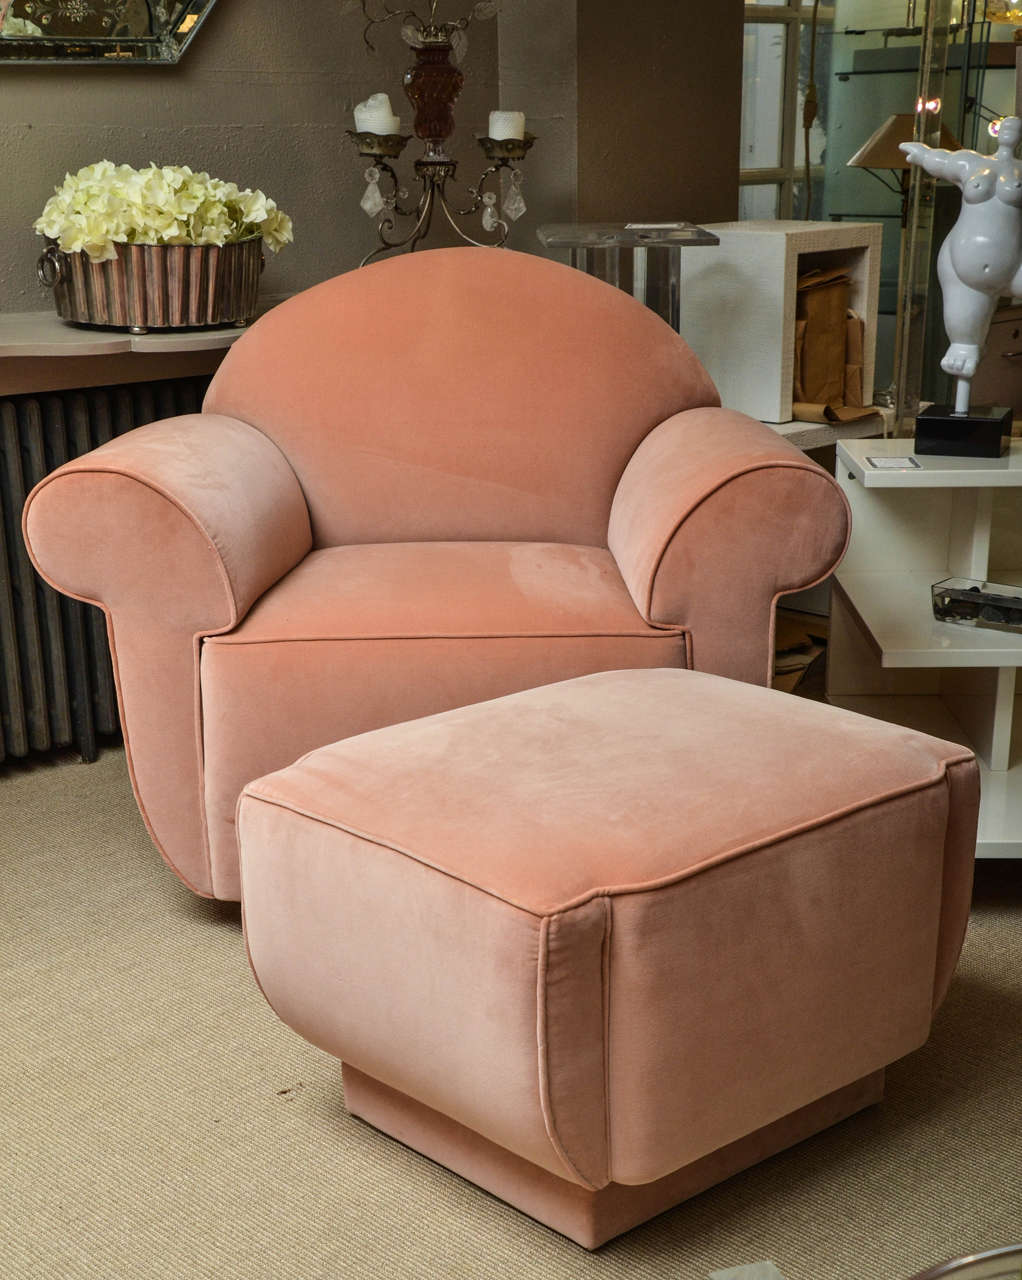 Striking Deco style club chair and ottoman upholstered in apricot velveteen.
Dimensions: The ottoman is 26 W x 21 D x 18 H.